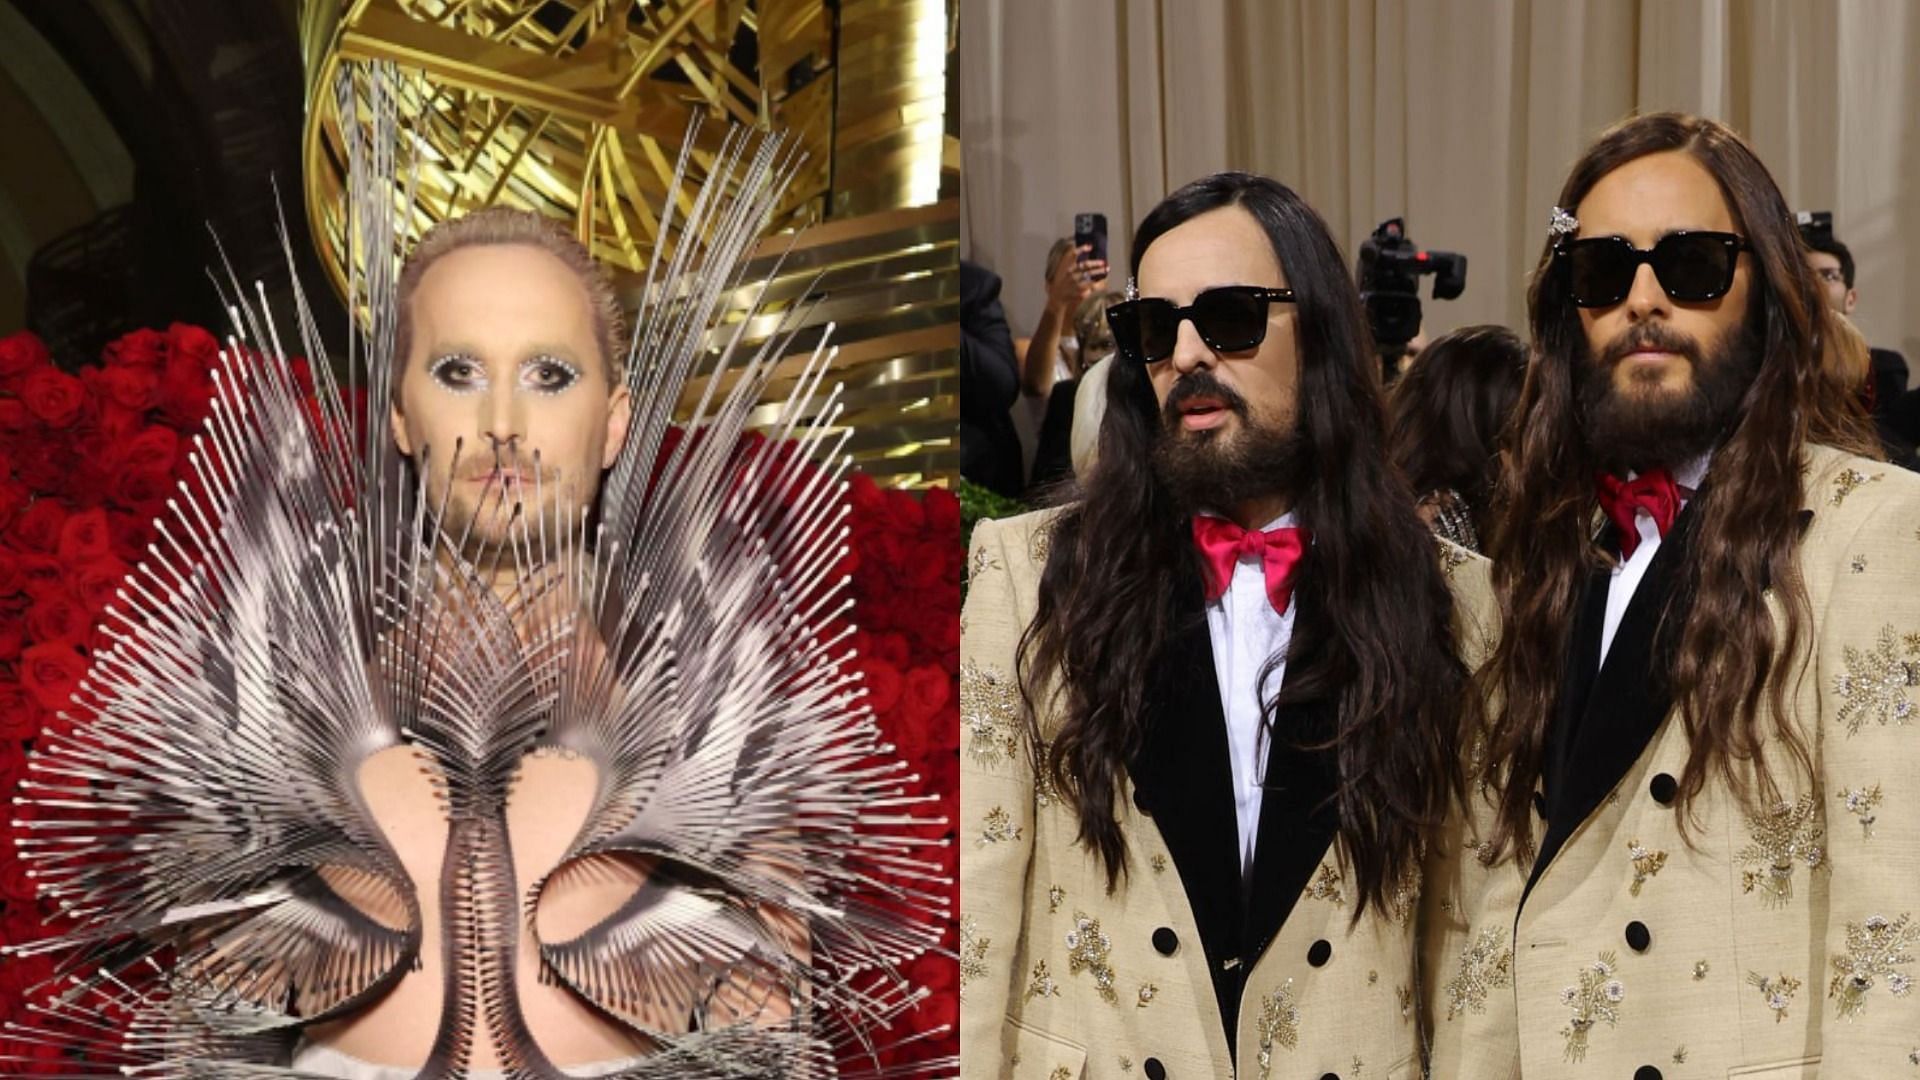 Frederik Robertsson was mistaken as Jared Leto in the 2022 Met Gala as the latter arrived with Alessandro Michele (Image via Cindy Ord/Getty Images and Mike Coppola/Getty Images)